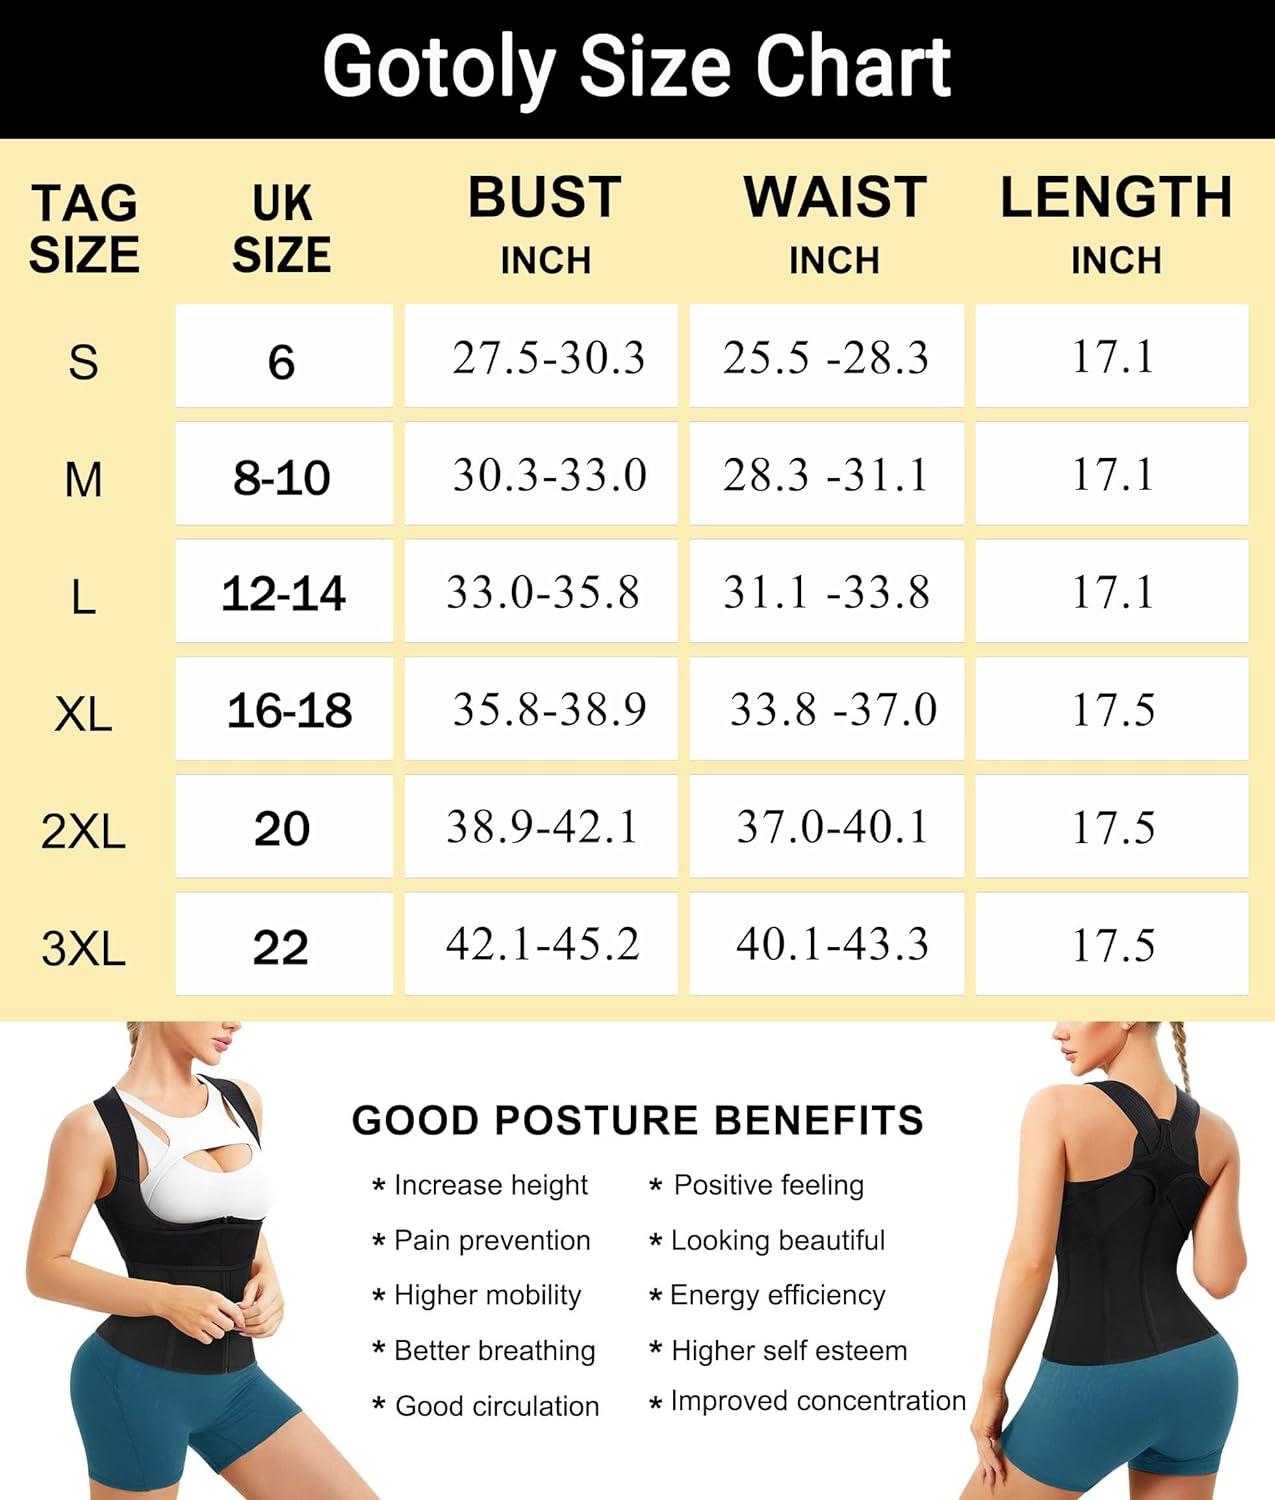 Women Chest Posture Corrector and Support Body Shaper Corset – Stay  Beautiful